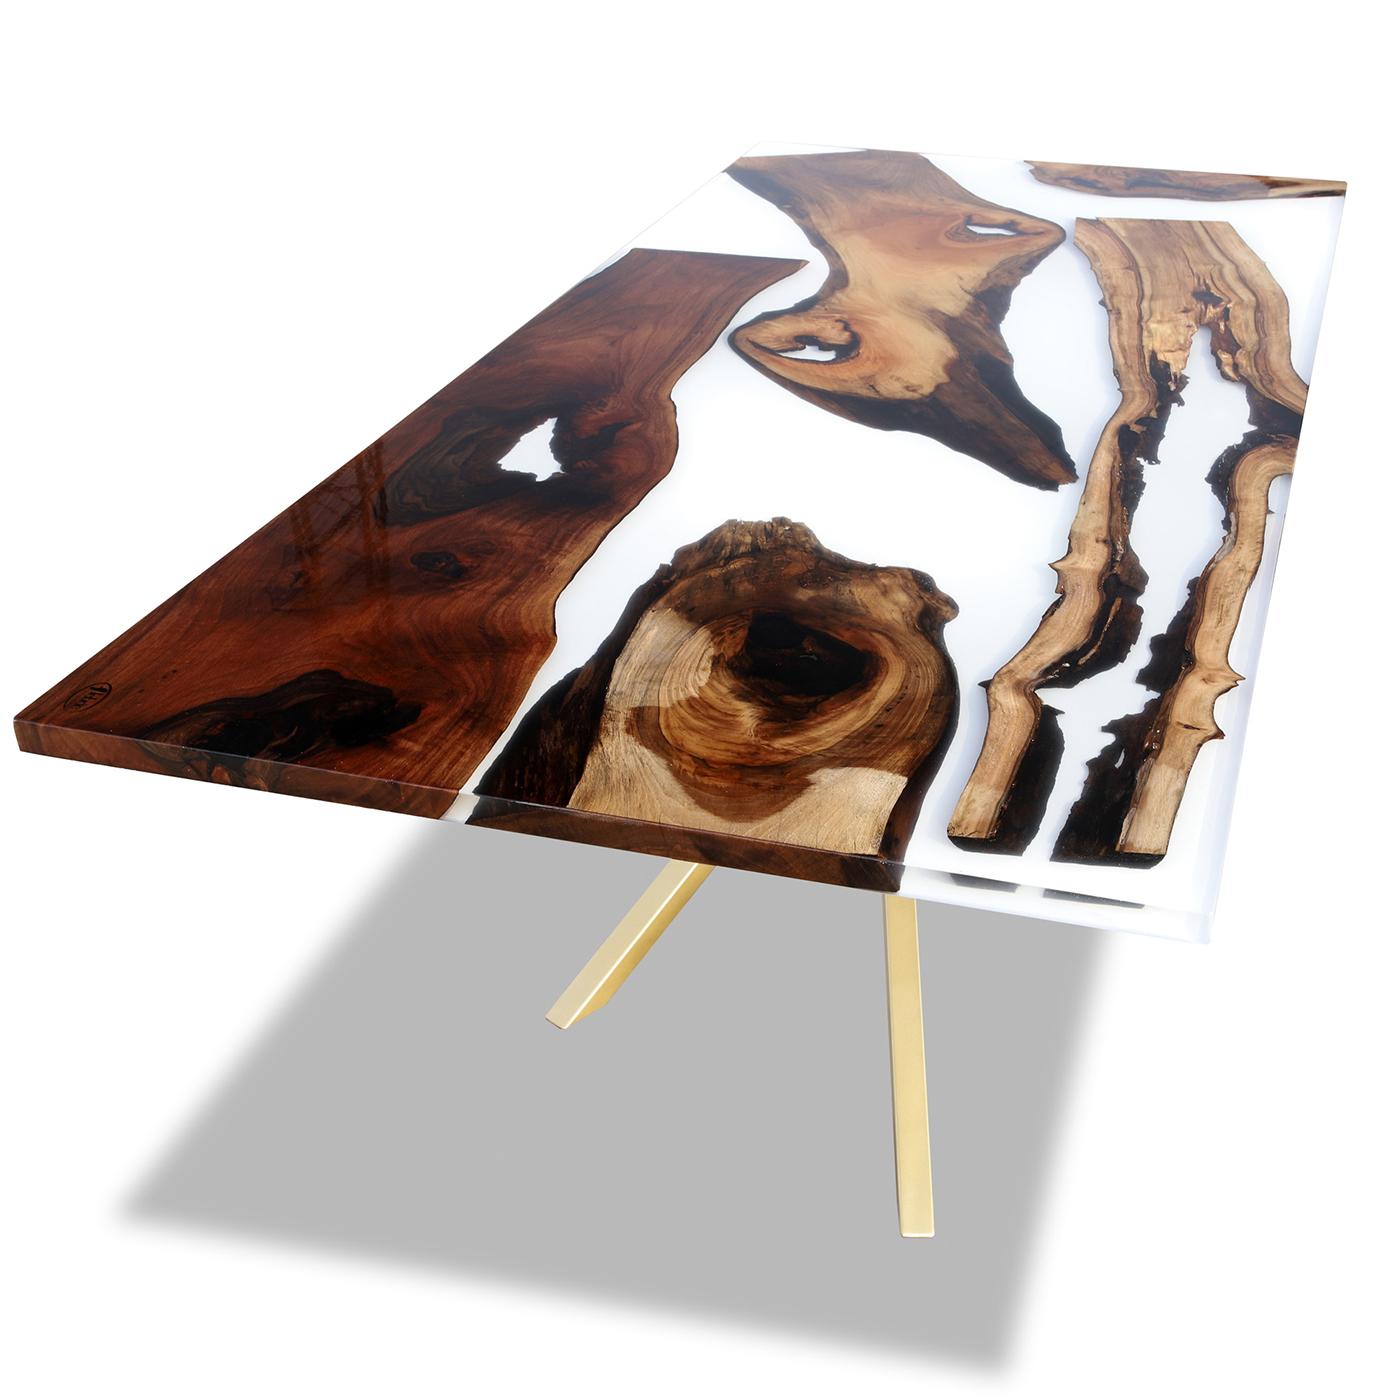 This original table was built by putting together several genuine walnut elements (also available in olive or chestnut) incorporated in transparent resin. Often a light blue shade is required which better resembles the image of the Stockholm cliff